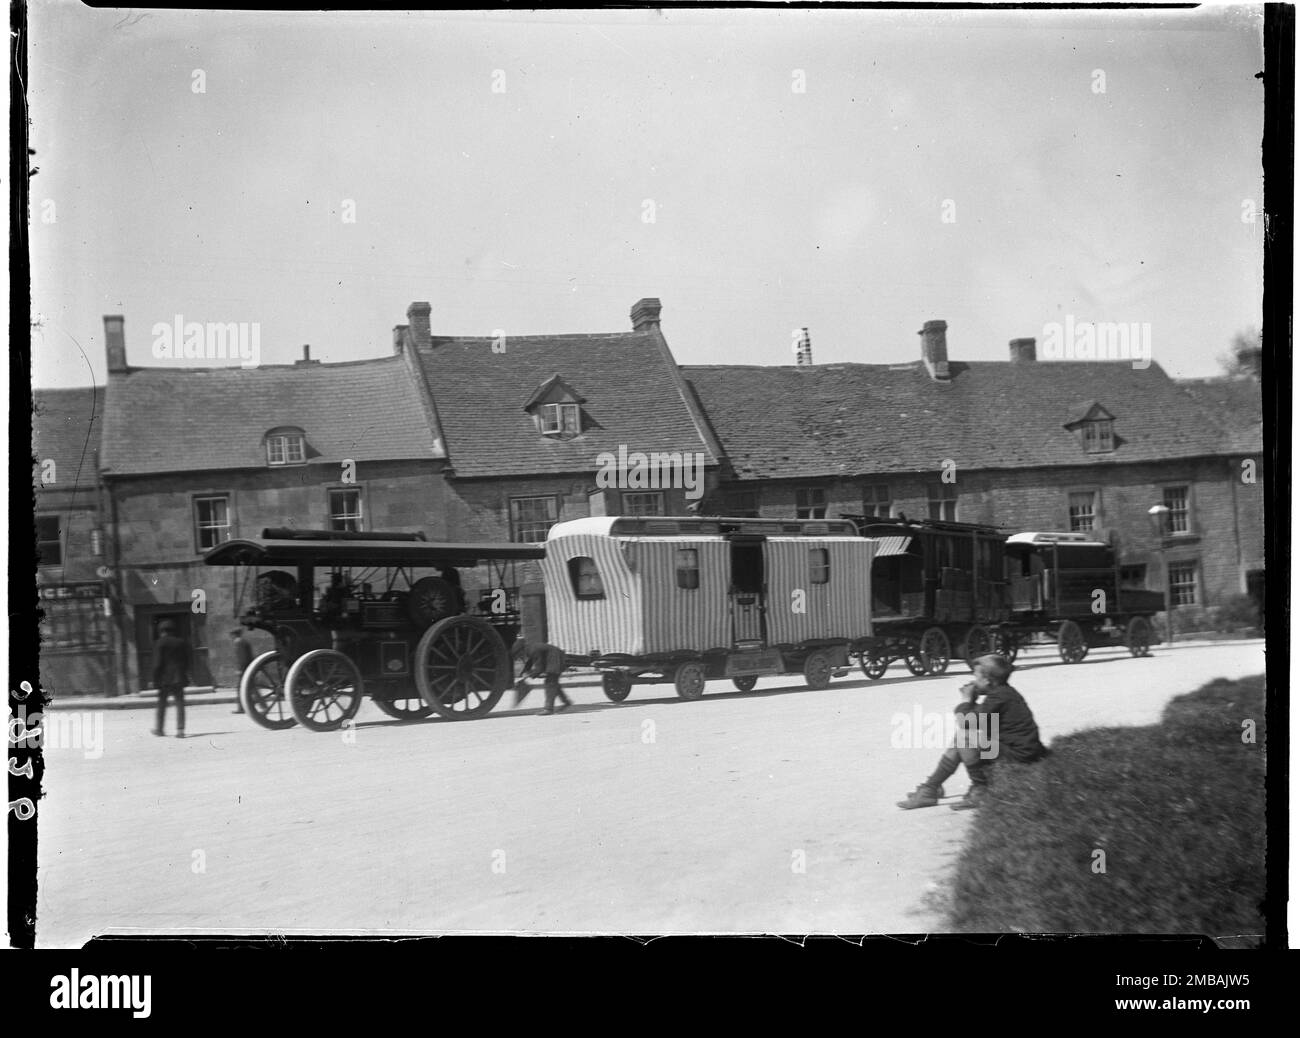 Stow-on-the-Wold, Cotswold, Gloucestershire, 1928. A steam-powered vehicle pulling gypsy caravans to the Stow Horse Fair past a row of houses, with a young boy watching from the foreground. Stock Photo